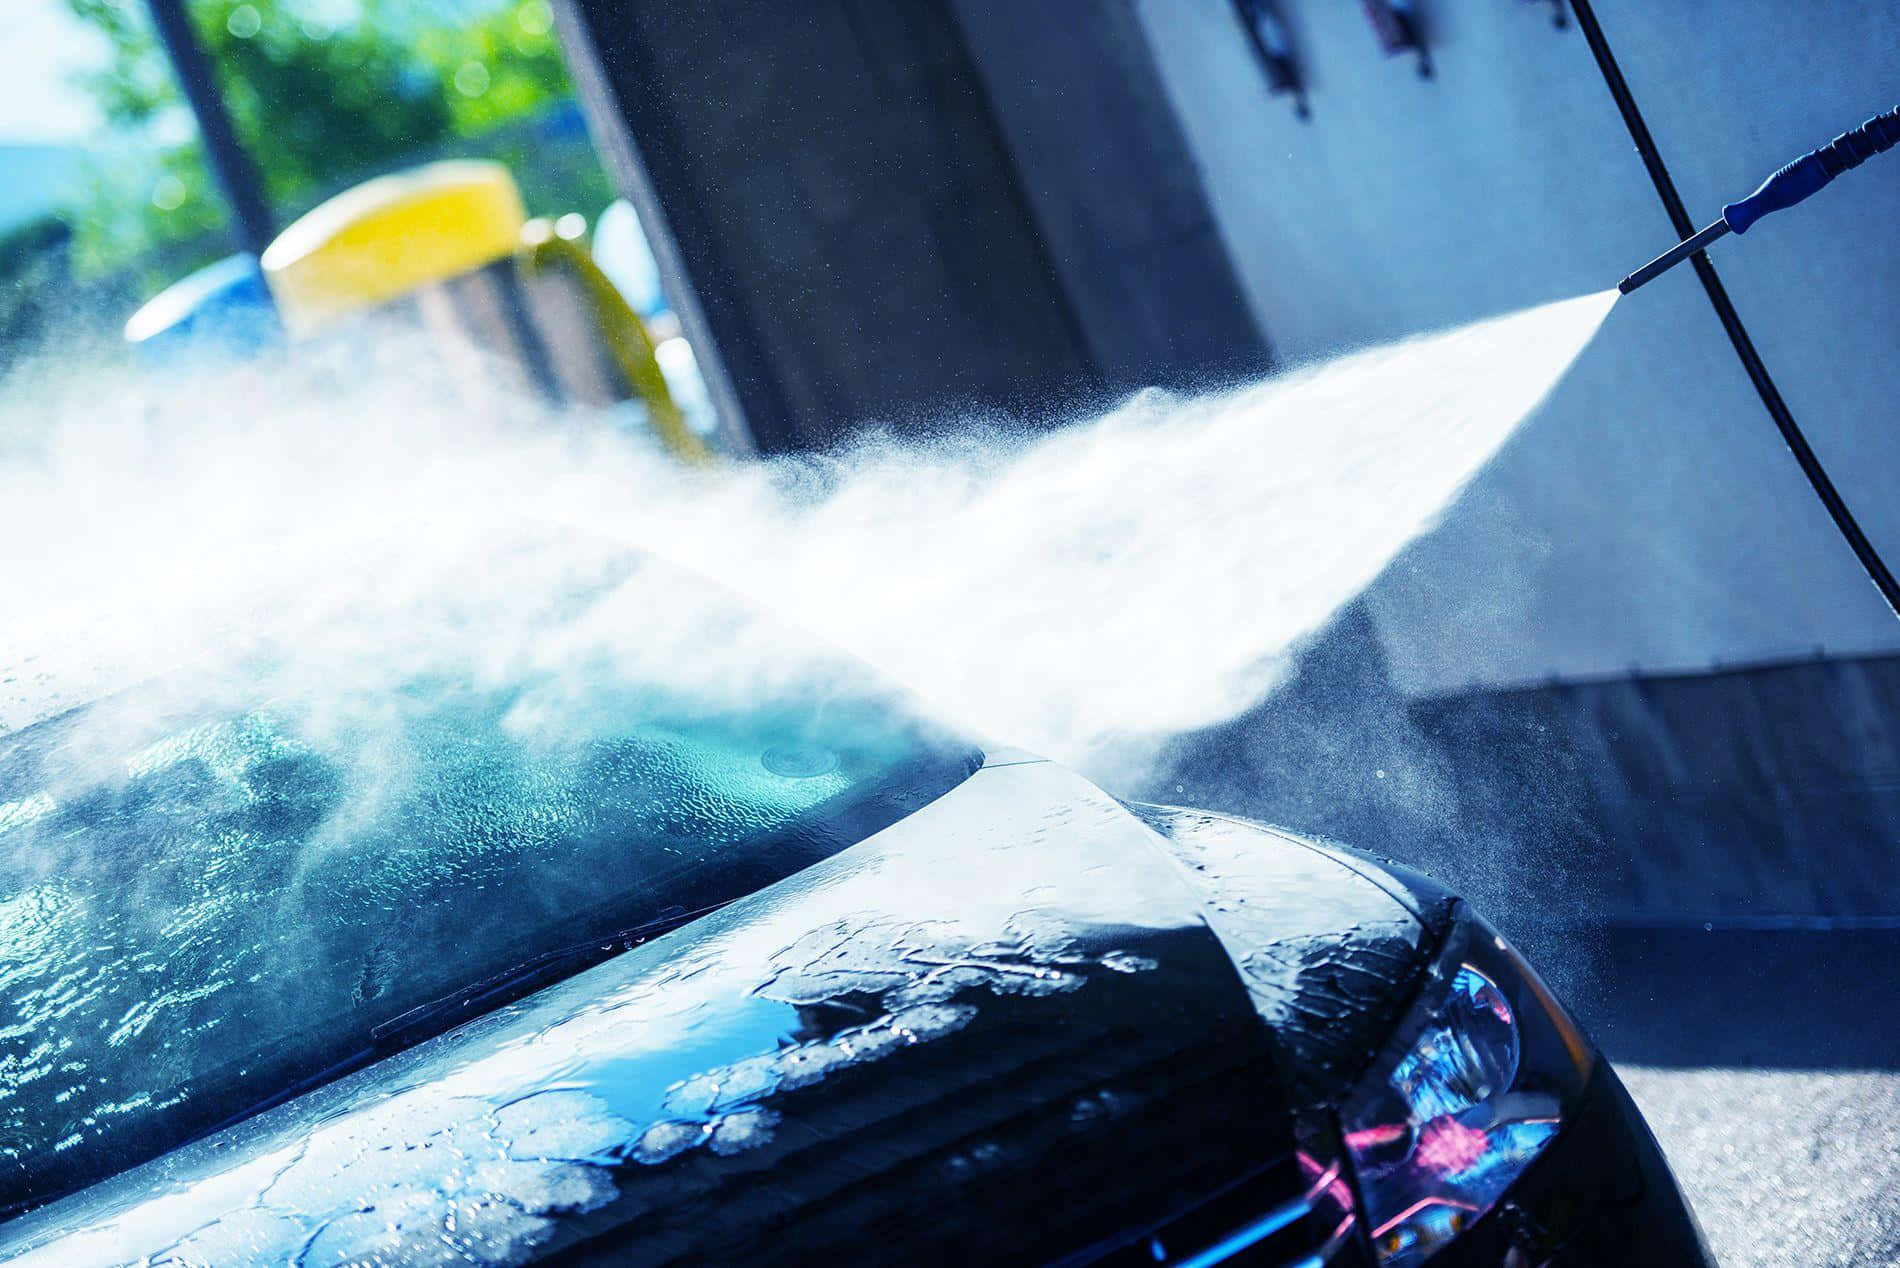 Keep your car looking clean with regular wash